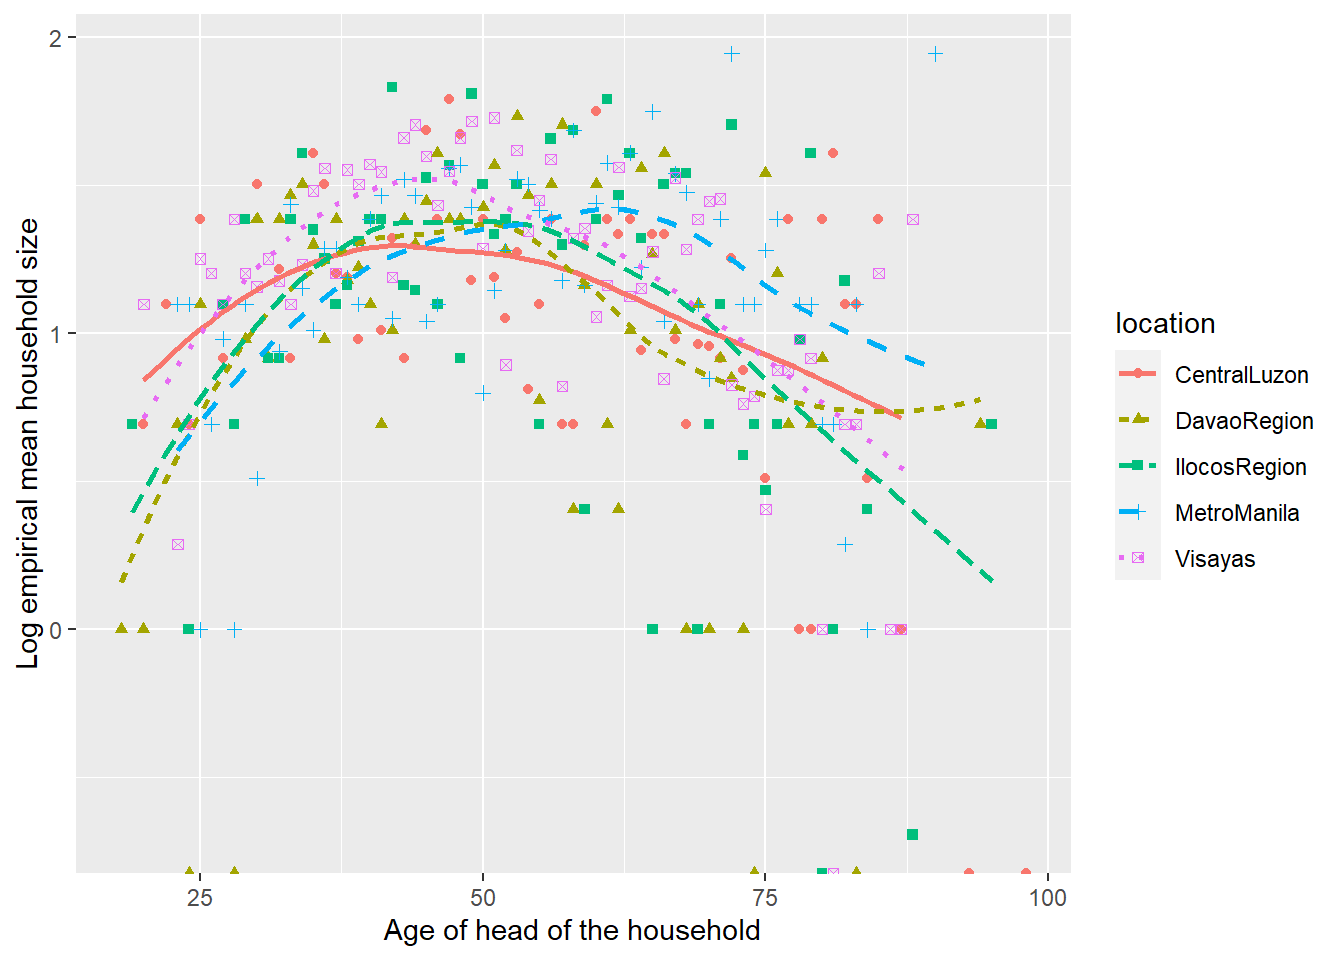 Empirical log of the mean household sizes vs. age of the head of household, with loess smoother by region.